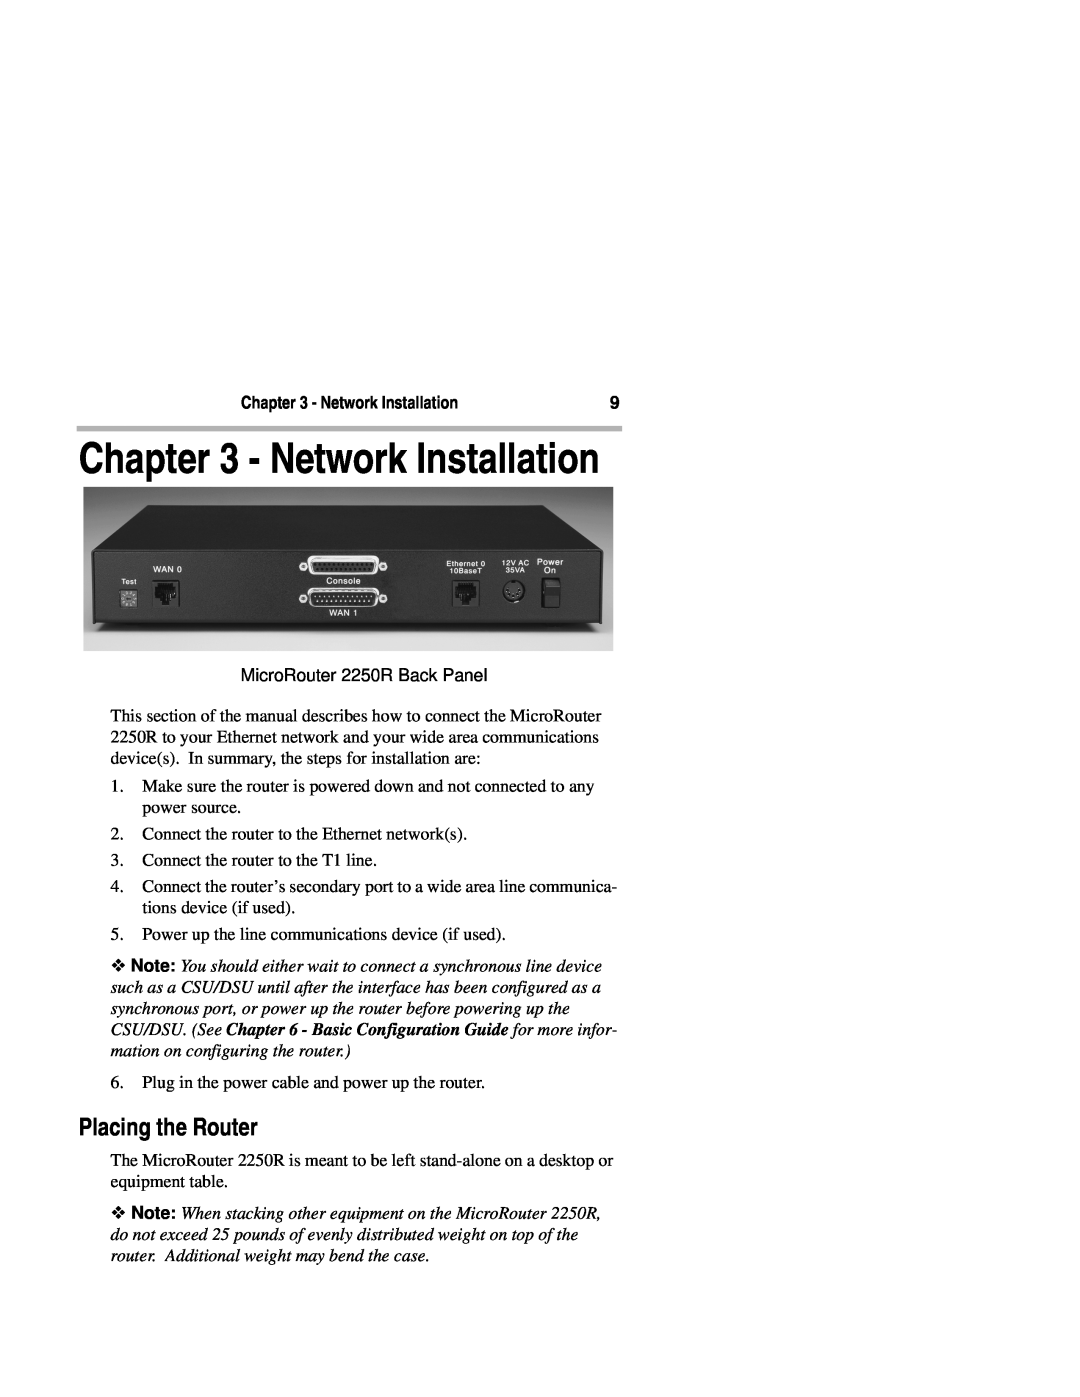 Compatible Systems 2250R manual Network Installation, Placing the Router 